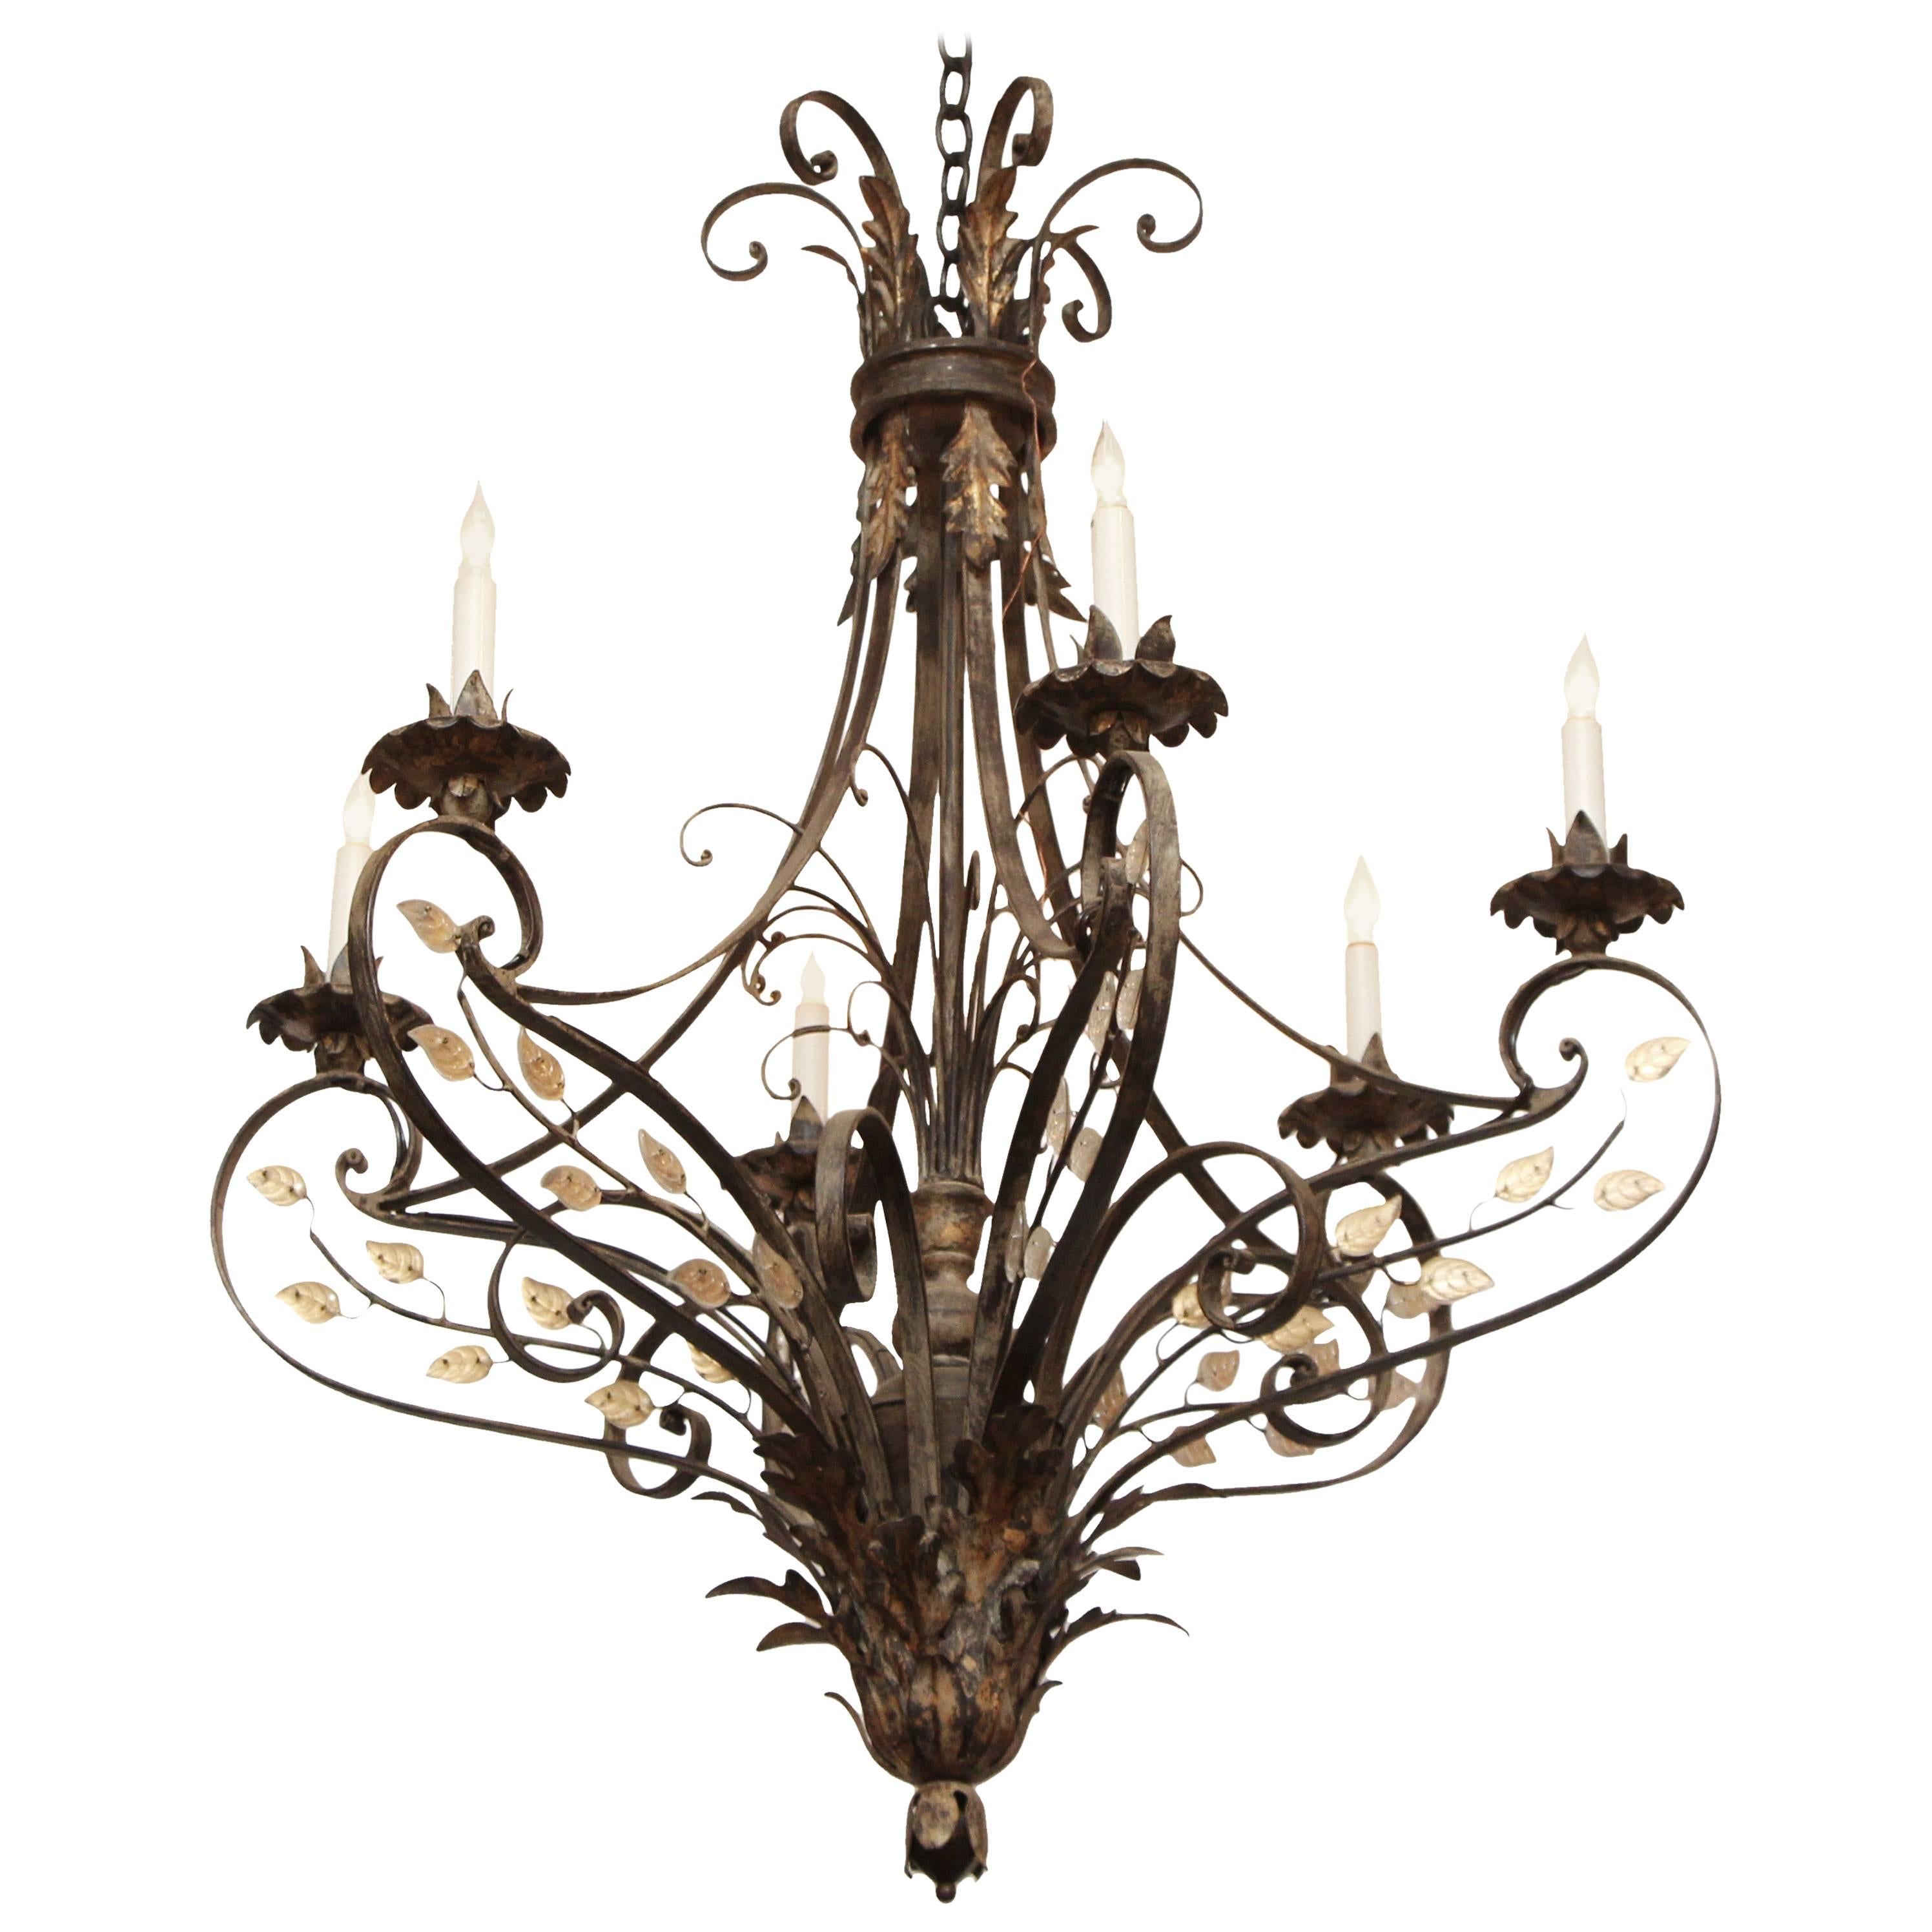 Geyser Wrought Iron Six-Arm Chandelier in a Gold Leaf Finish with Crystal Detail